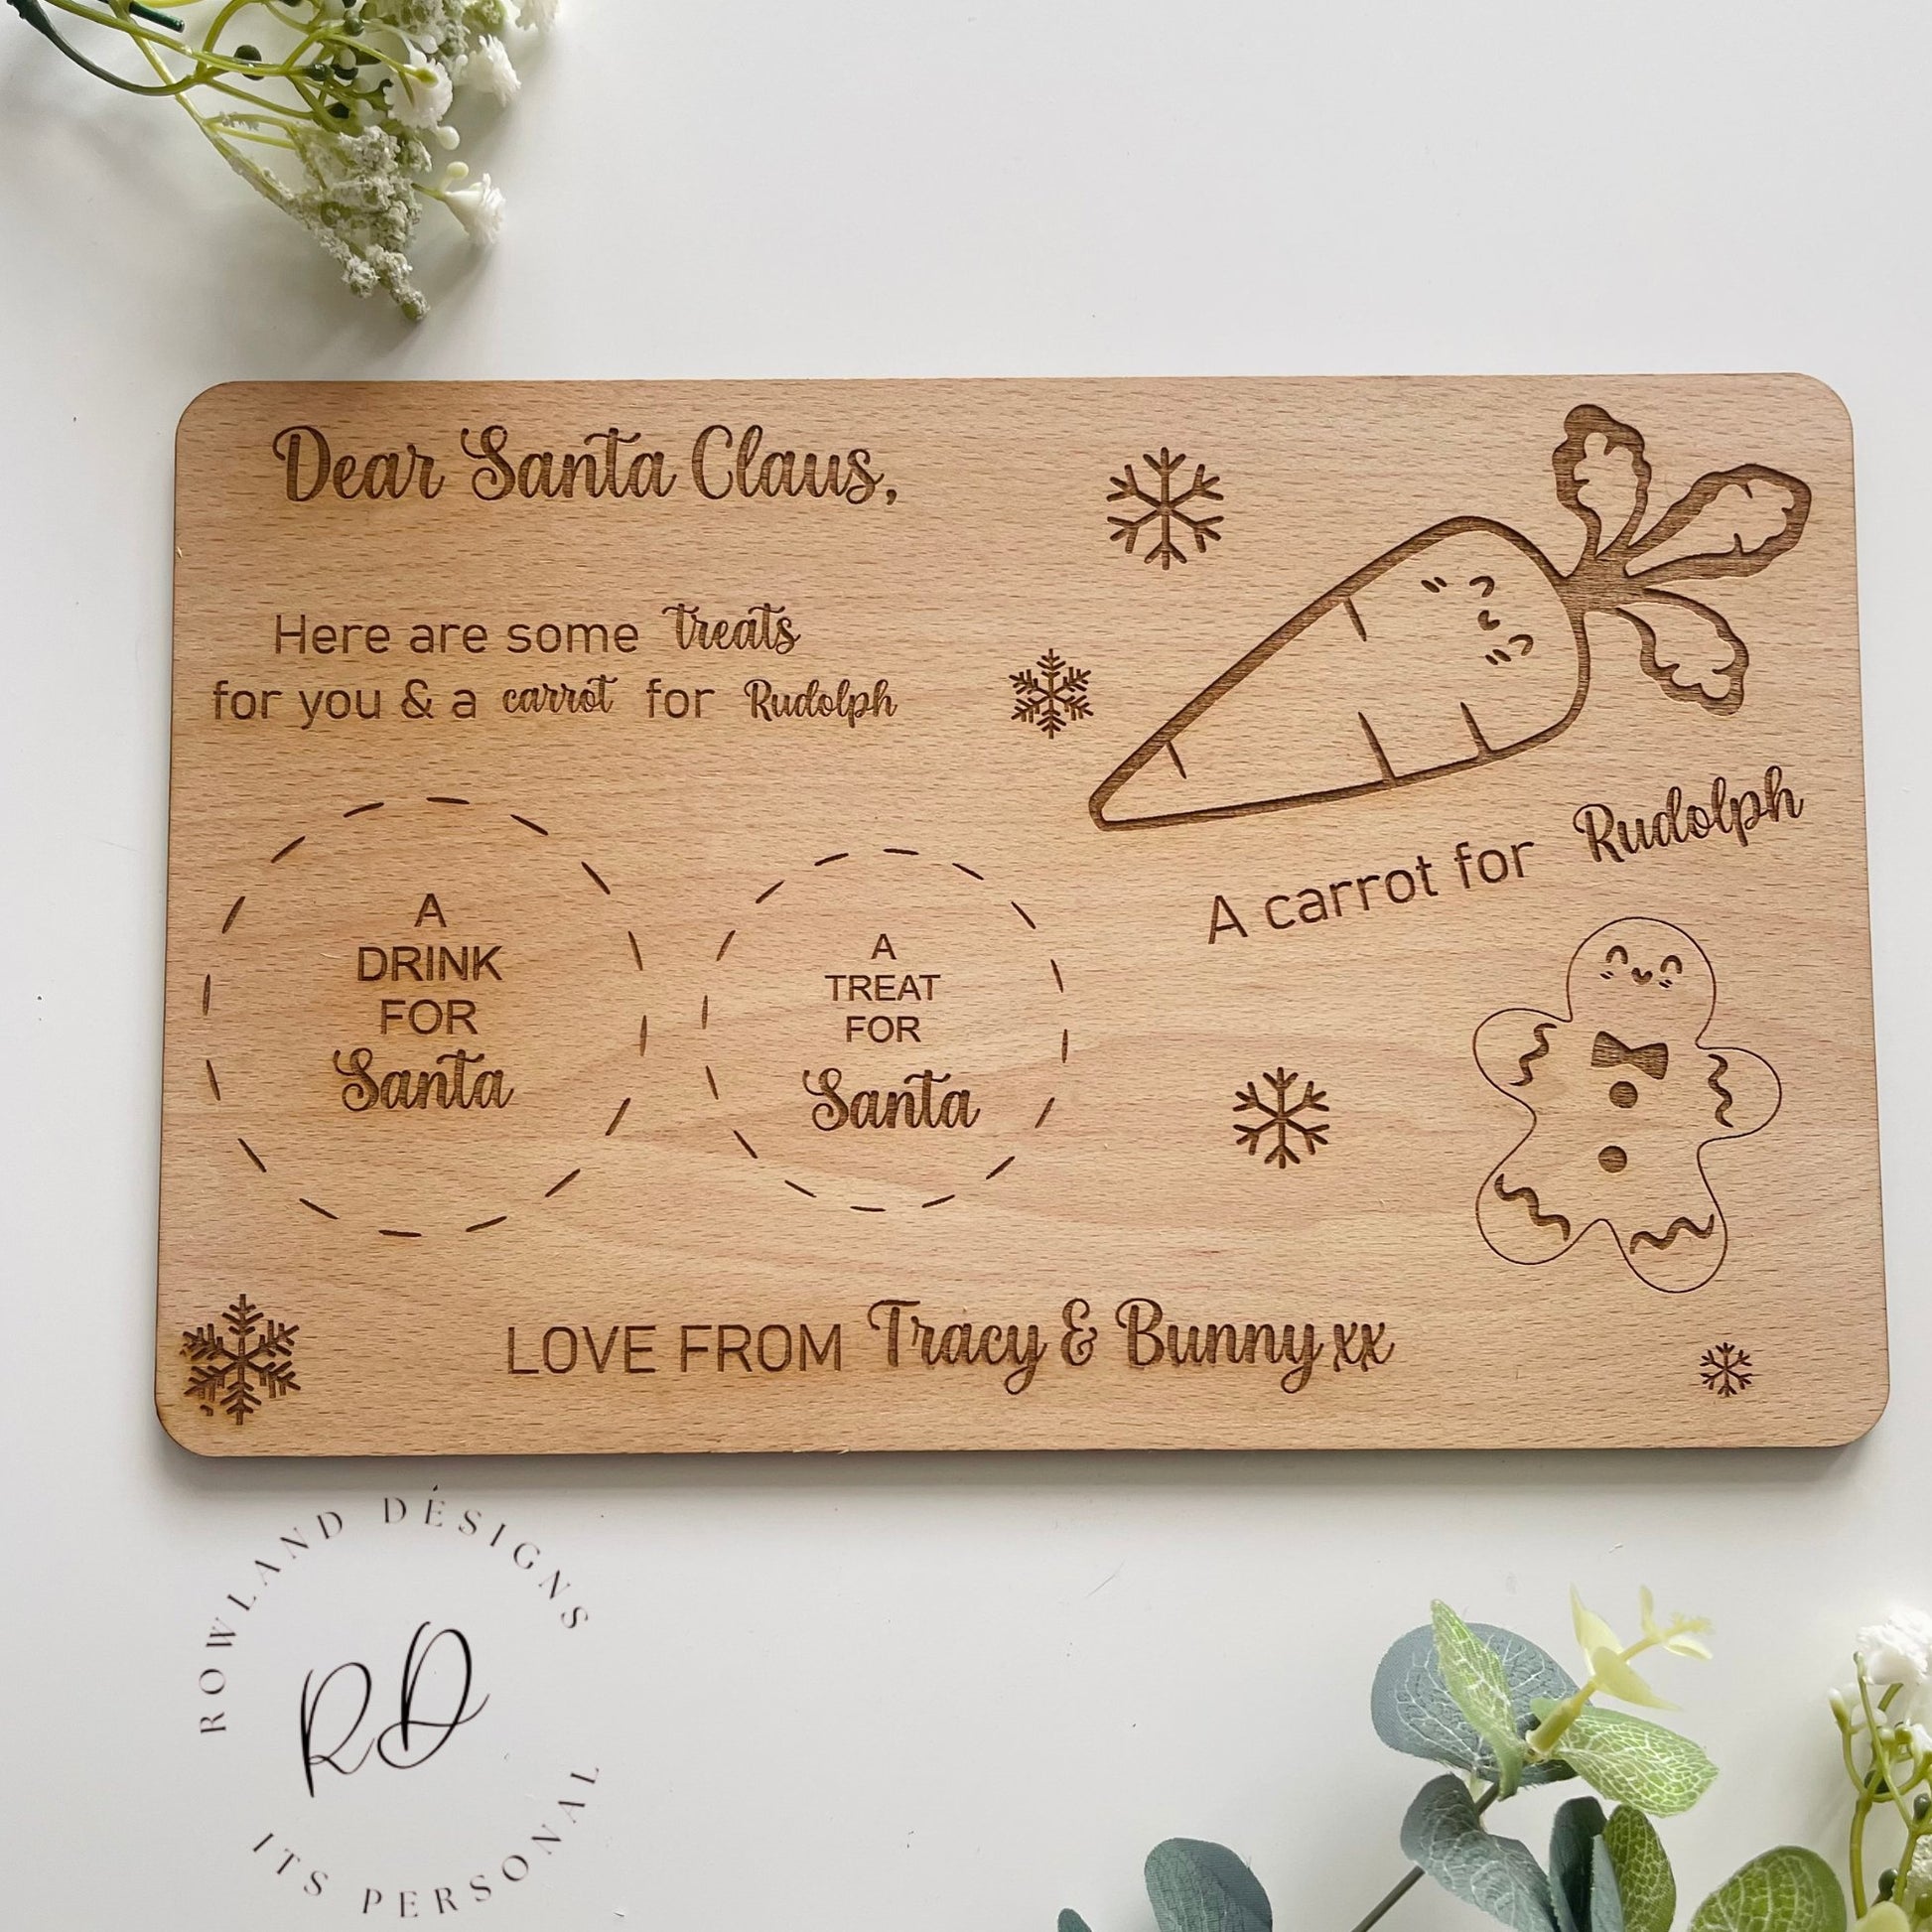 Make Christmas Eve extra special with our Personalized Santa Plate. Customizable for up to three names, complete with dedicated sections for Santa's treats, drink, and Rudolf's carrot, embellished with delightful gingerbread and snowflake engravings. Crafted from 4mm beech veneer, sized at 290mm x 185mm.